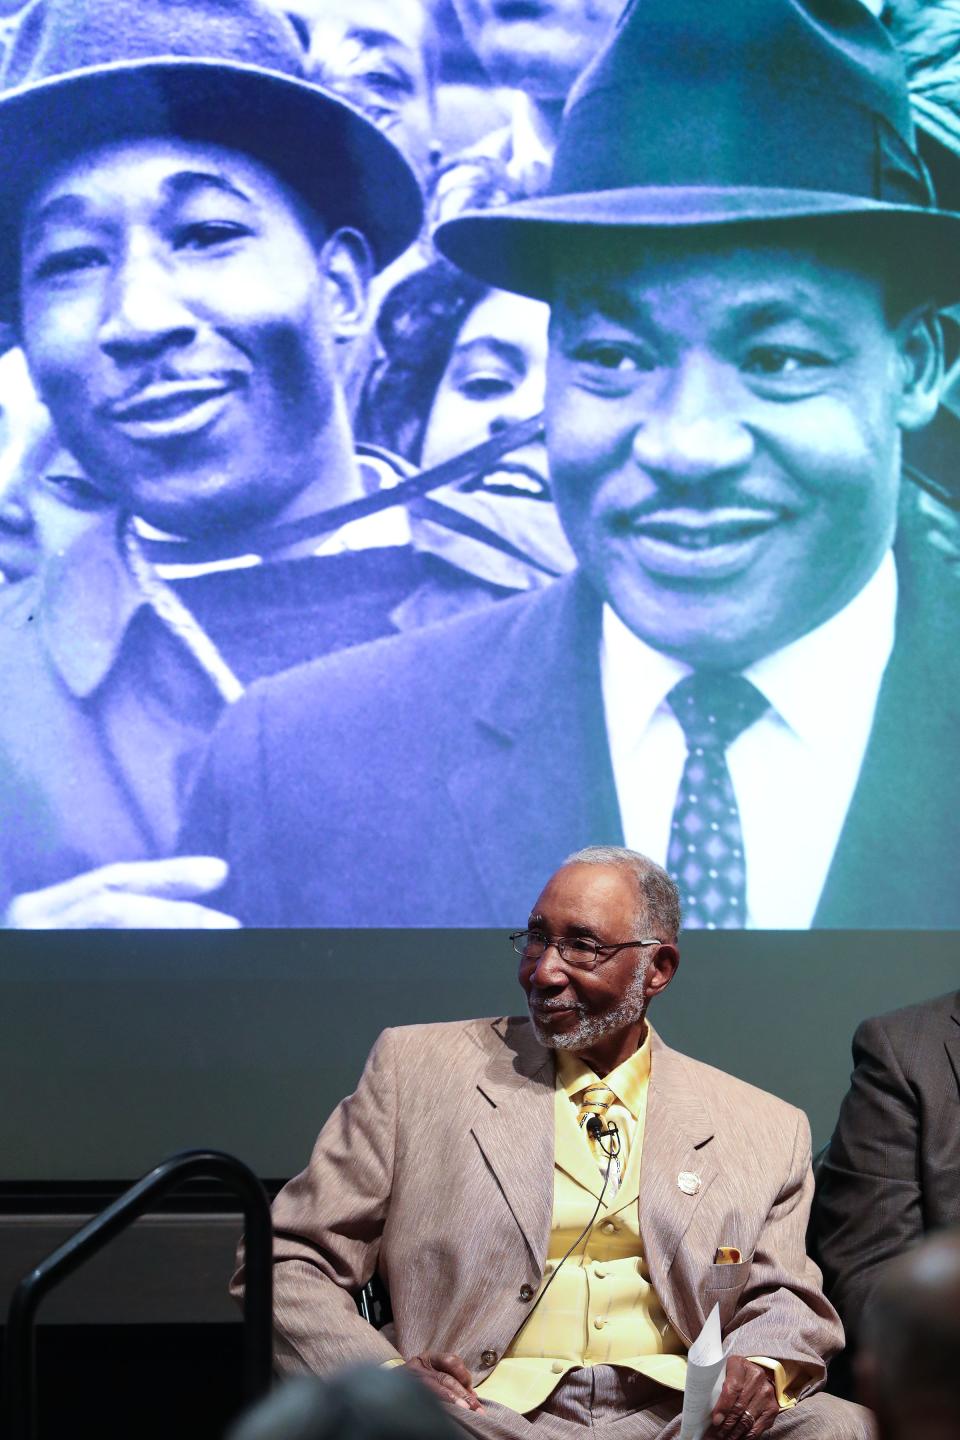 The Rev. Louis Newby spoke about his recollections of the 1964 March on Frankfort during a discussion as part of the Frazier History Museum's Bridging the Divide Series in Louisville, Ky. on Feb. 22, 2024. He was sitting beneath a photo of himself, on the left, with Martin Luther King Jr. who was one of the speakers at the march.